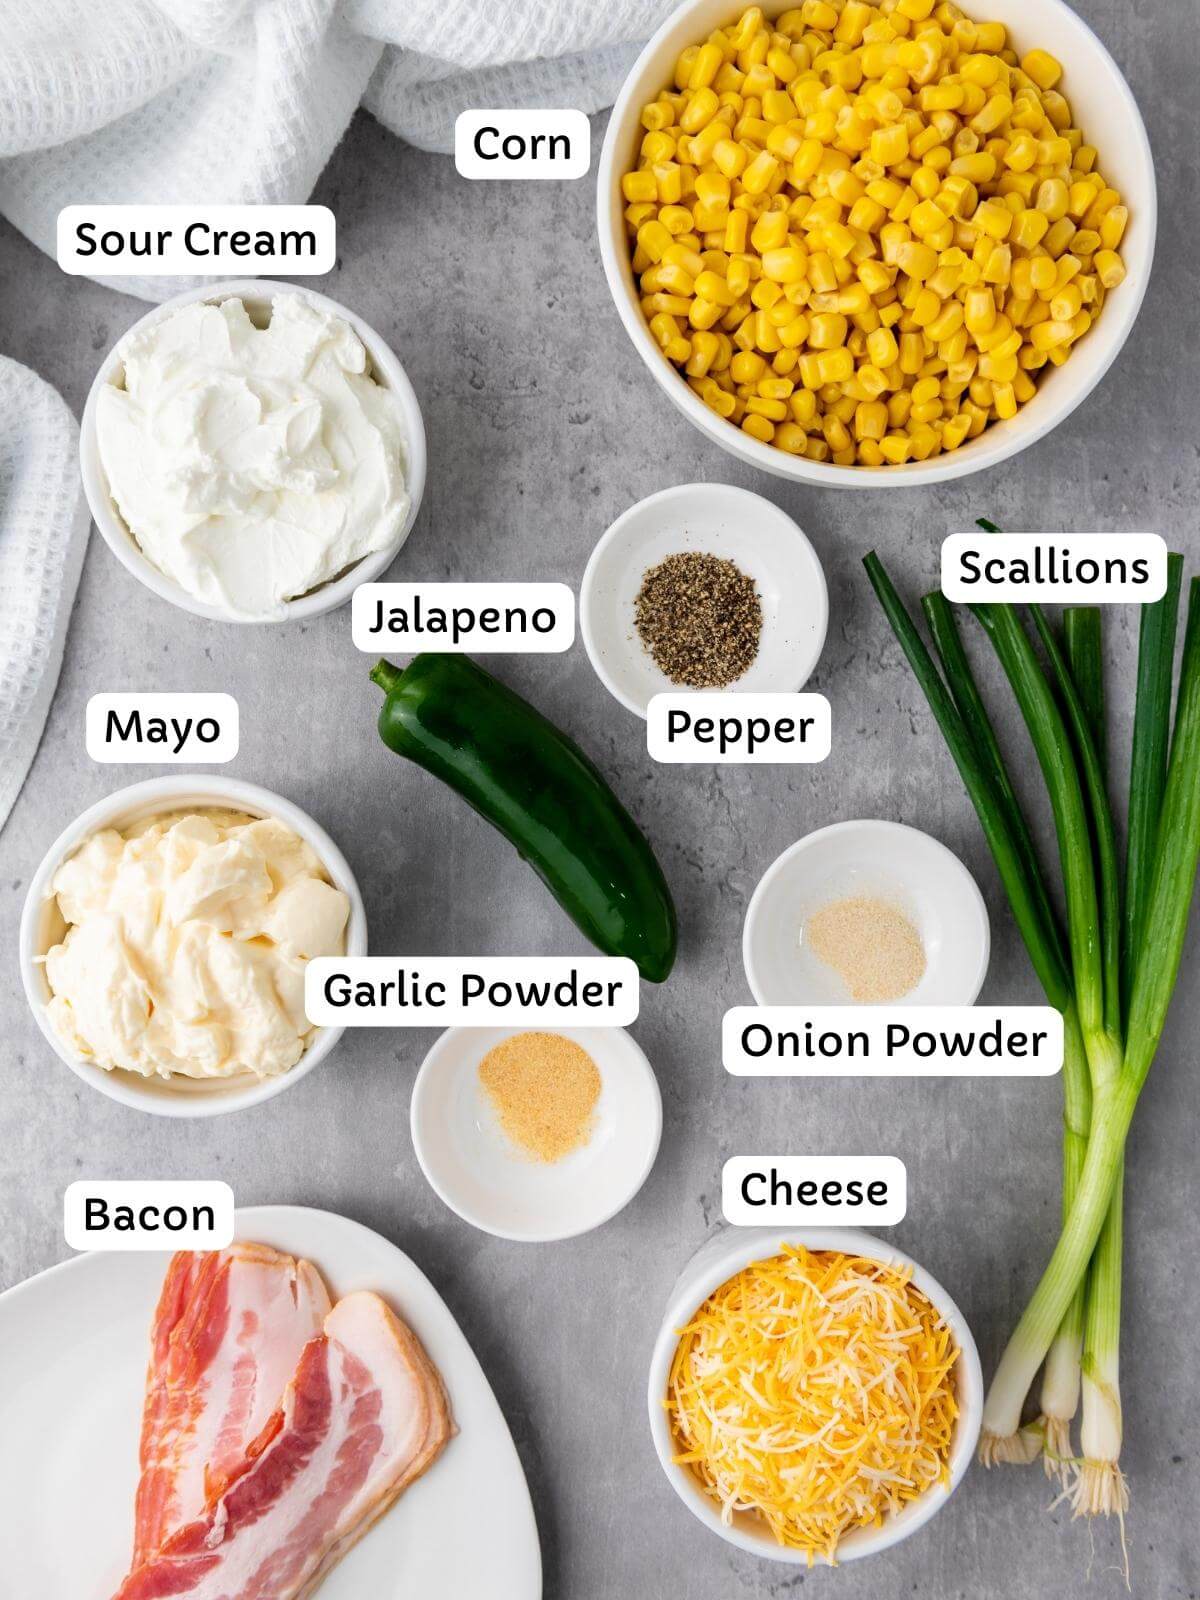 Ingredients for making corn dip that are labeled.